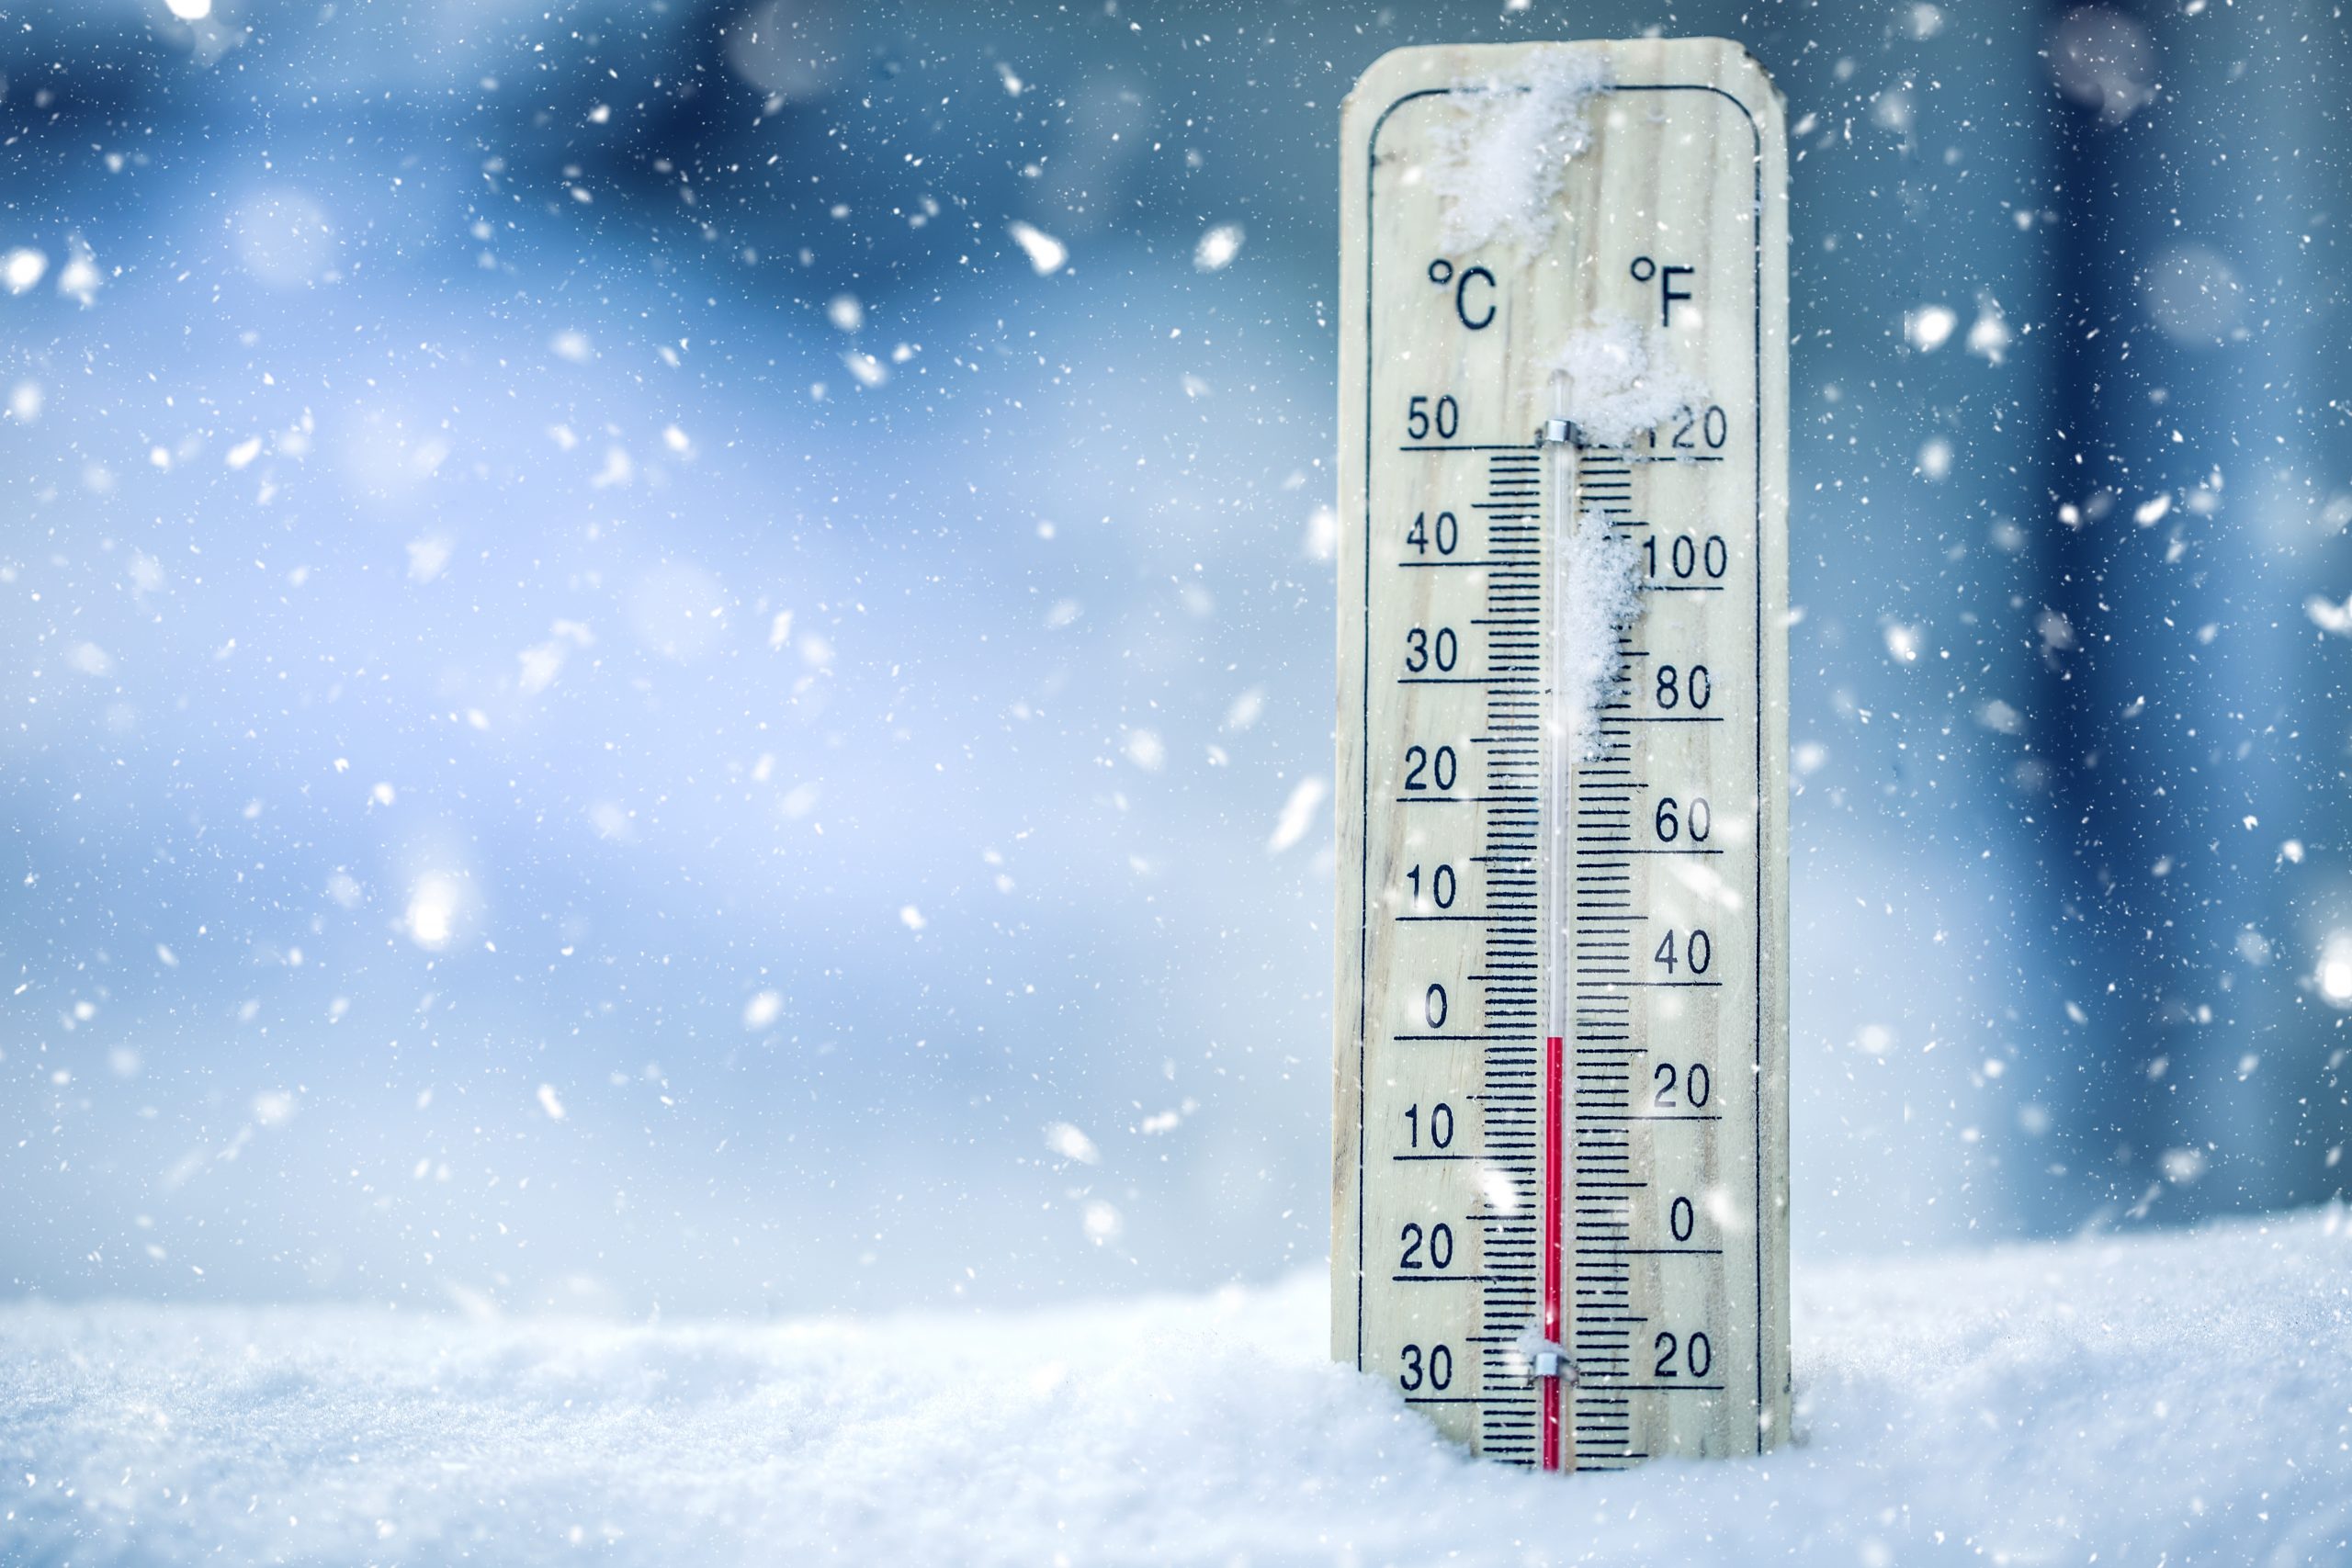 Thermometer on snow shows low temperatures - zero. Low temperatures in degrees Celsius and fahrenheit. Cold winter weather